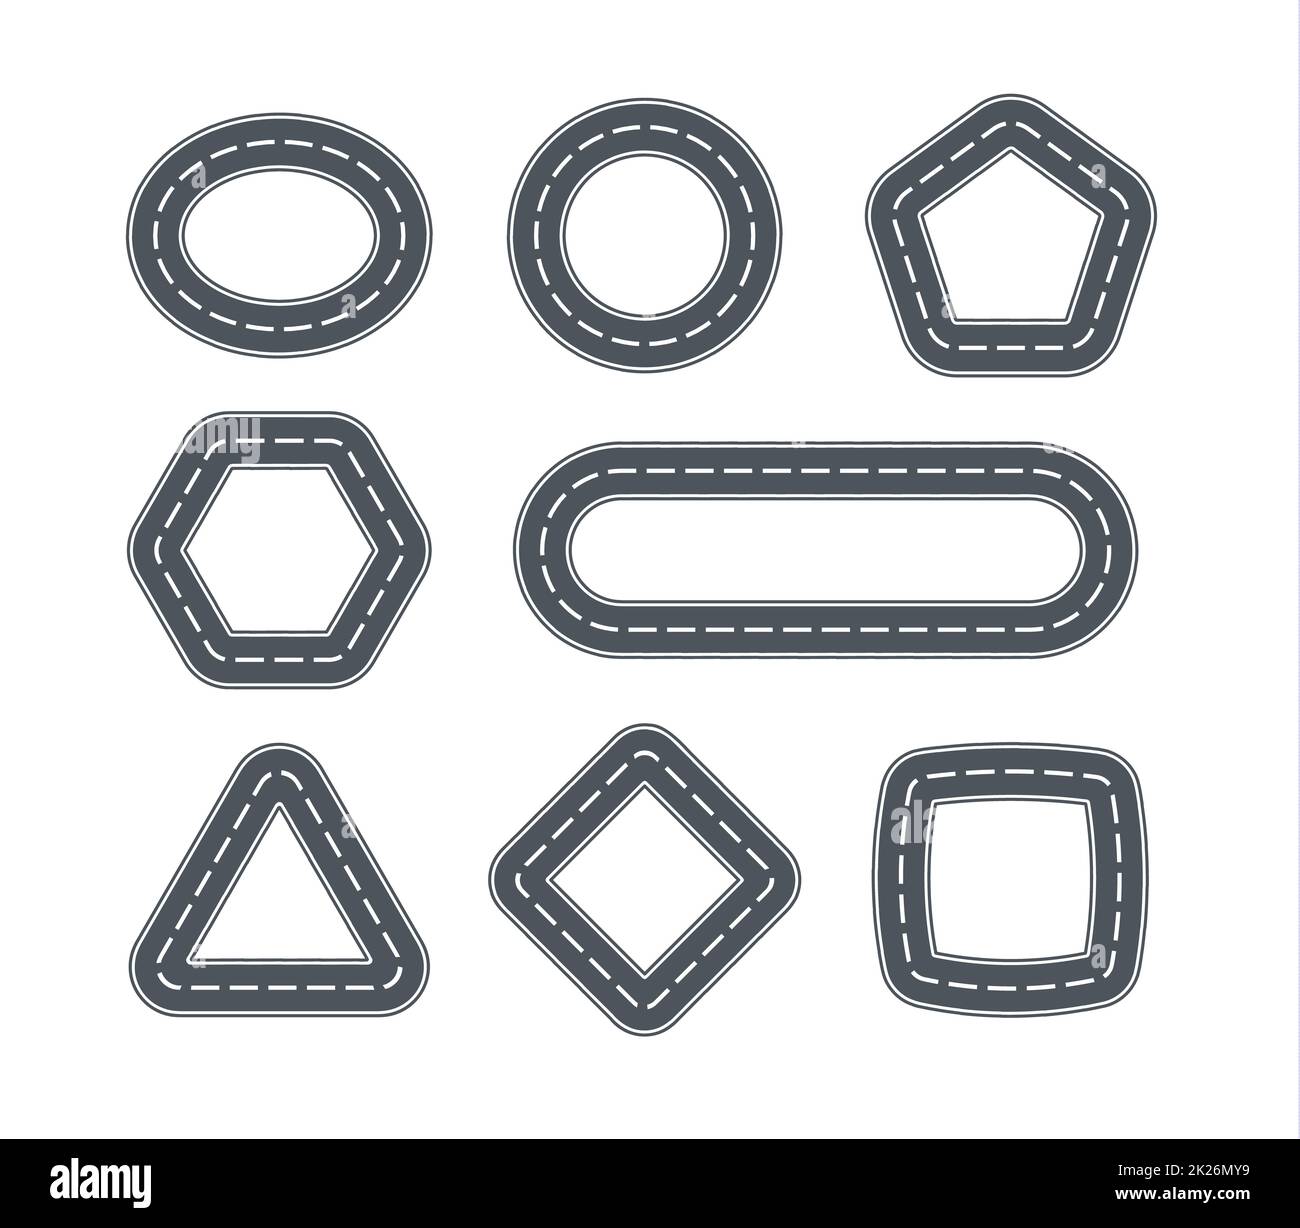 Road icons for cars in the form of geometric shapes map element. Set of closed line of car tracks. Isolated vector illustration. Top view graphic elements for toy design. Stock Photo